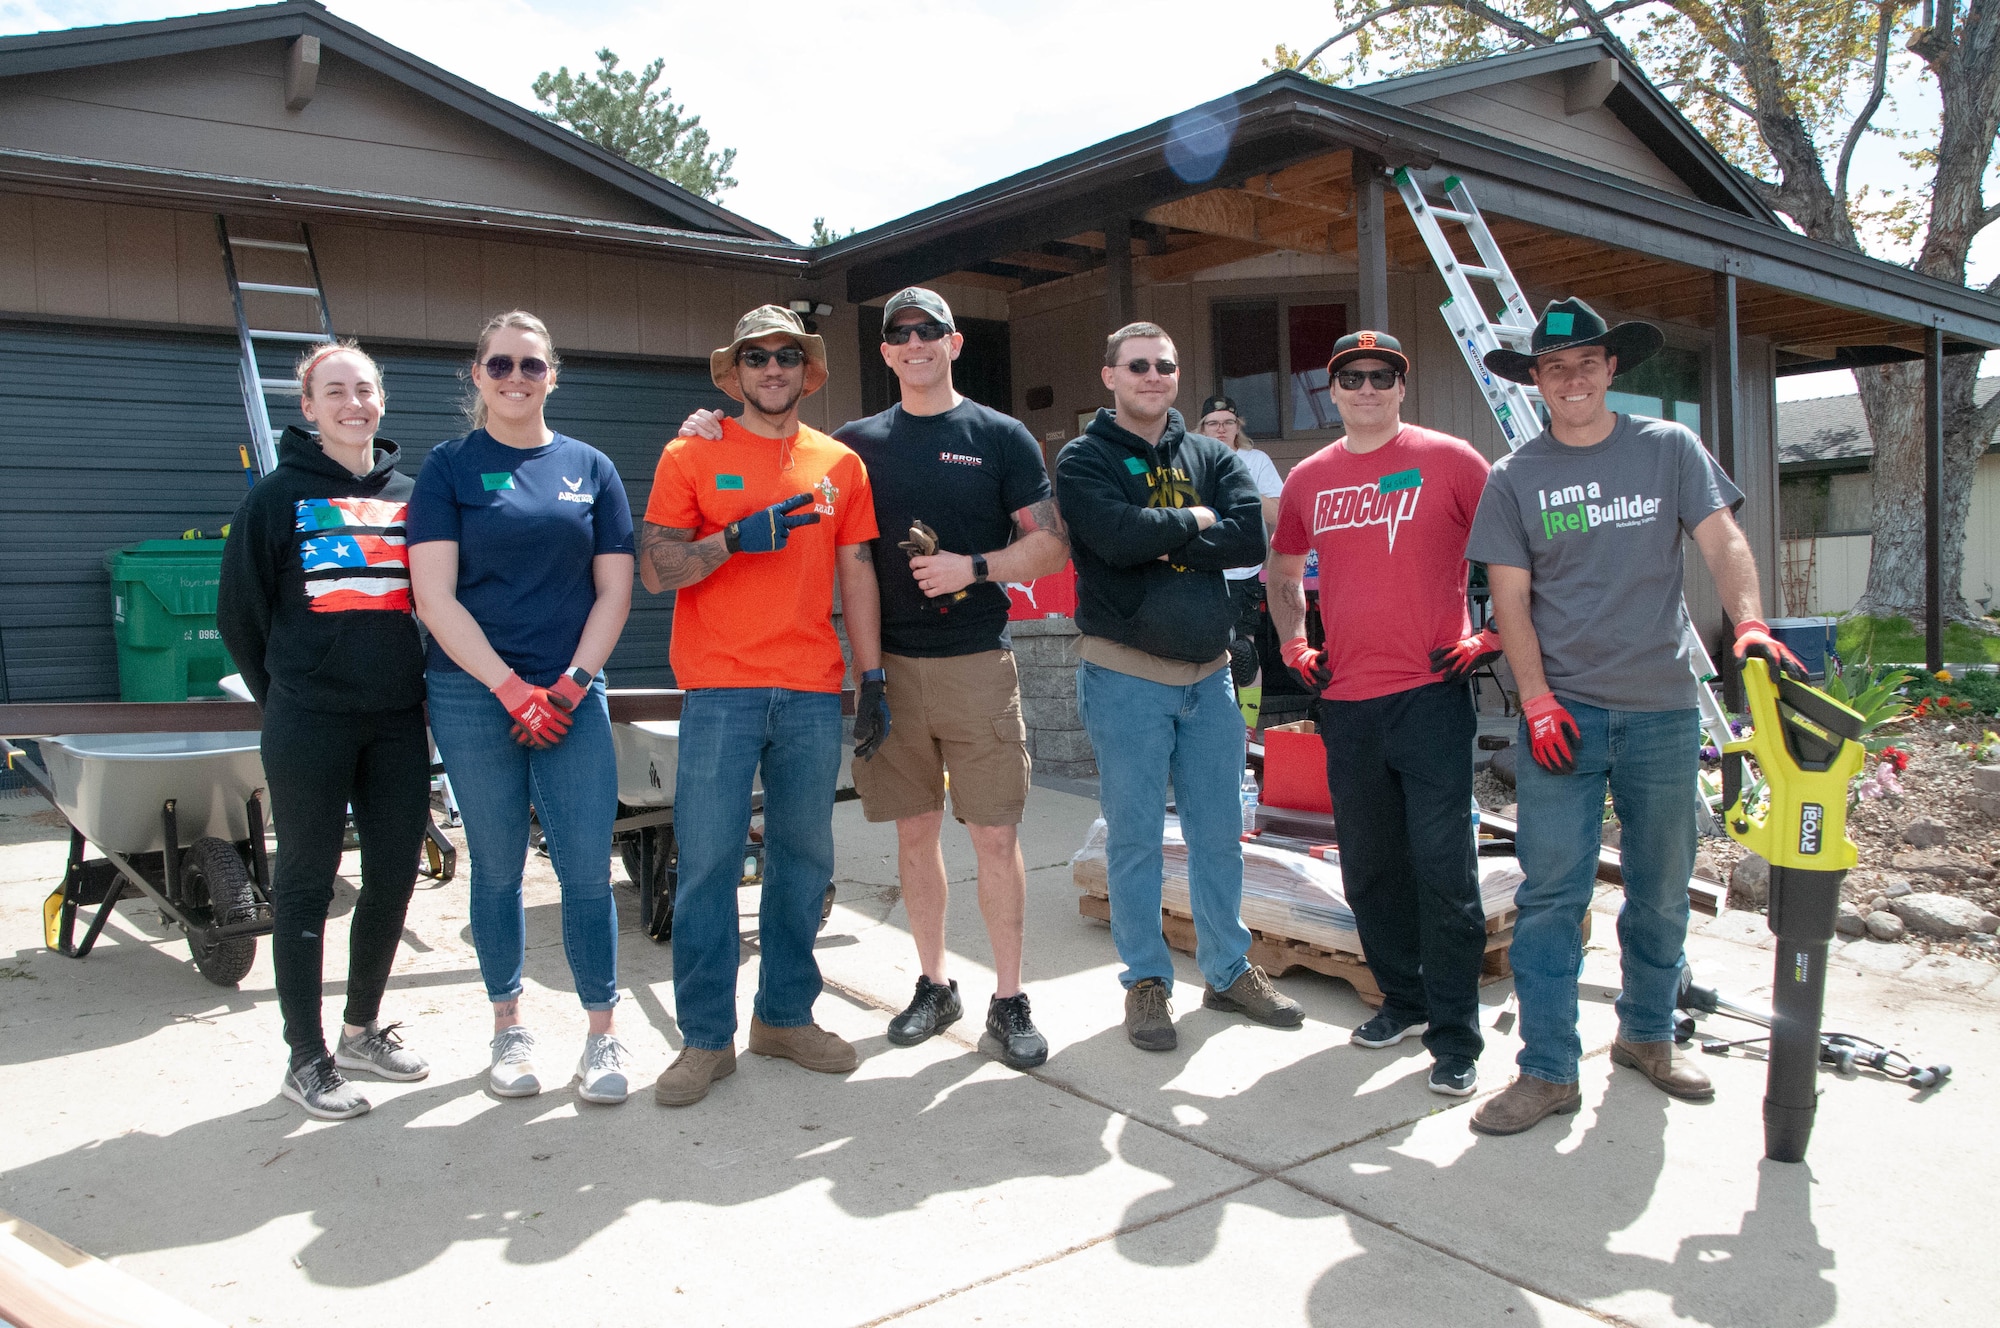 On April 30, Airmen and volunteers from local organizations partnered together with Rebuilding Together Northern Nevada (RTNNV) to provide home repairs and updates for two veteran homeowners in Washoe County.